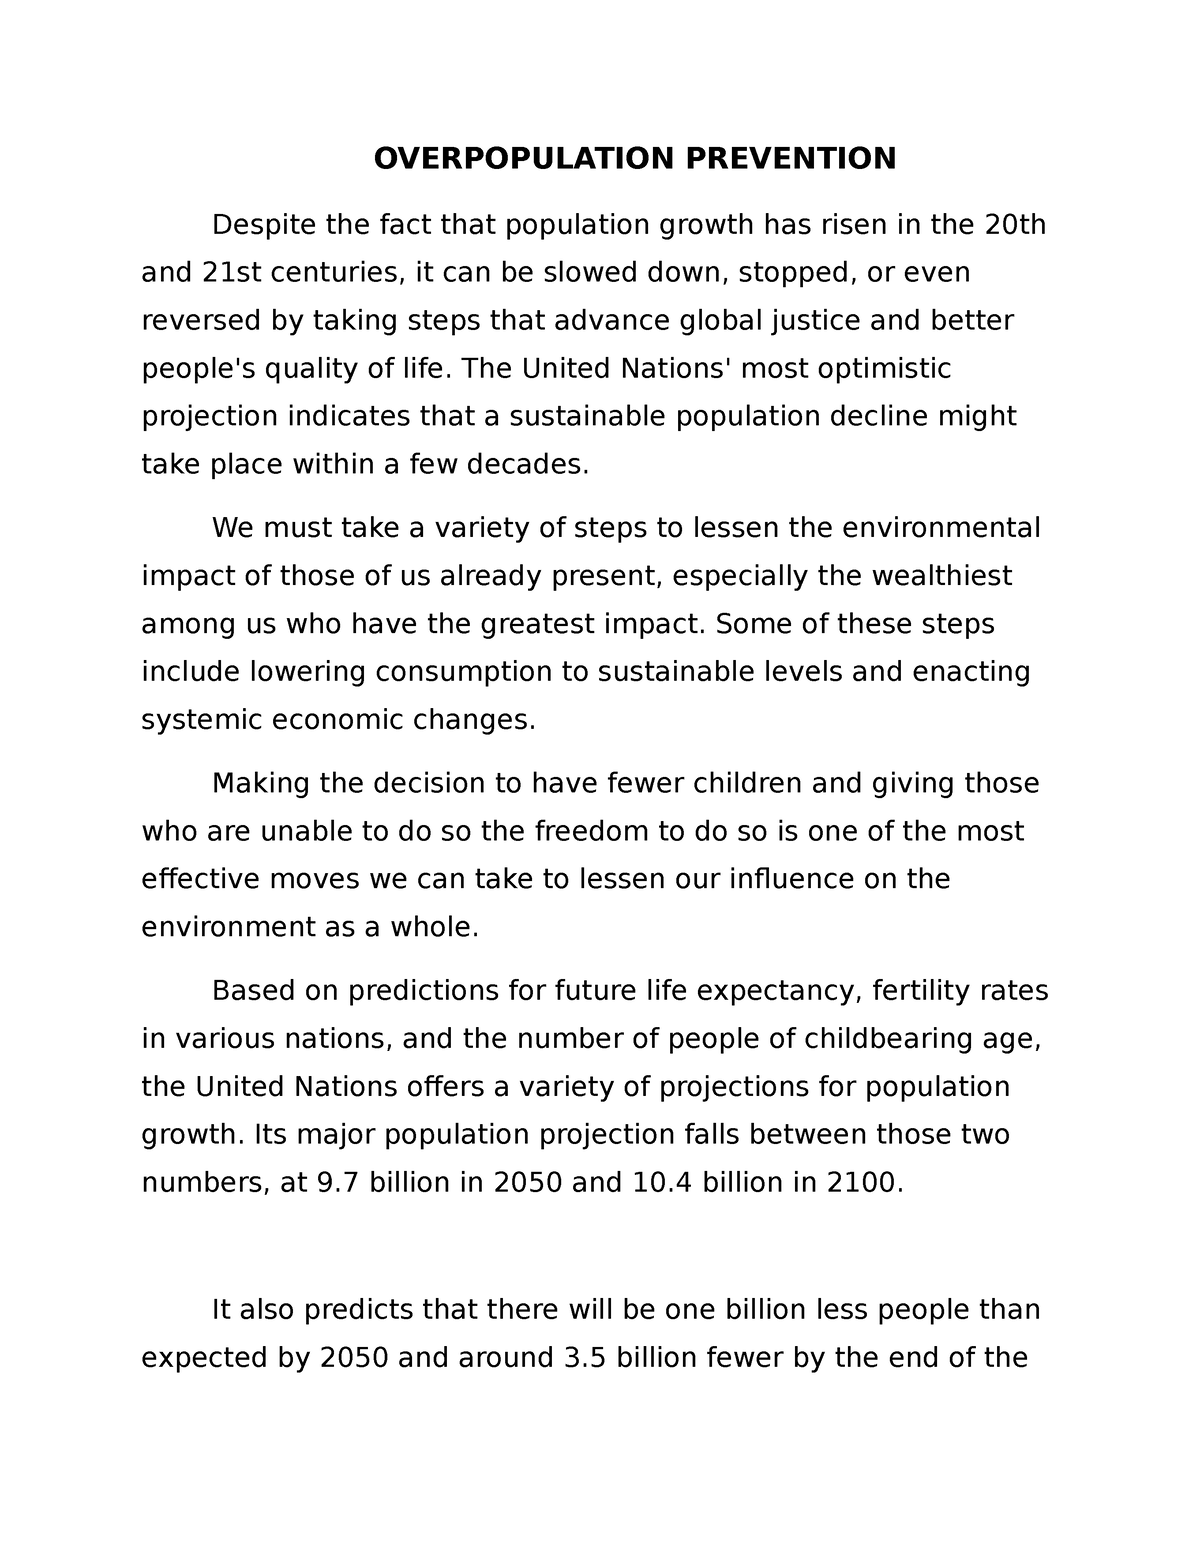 example of persuasive essay about overpopulation